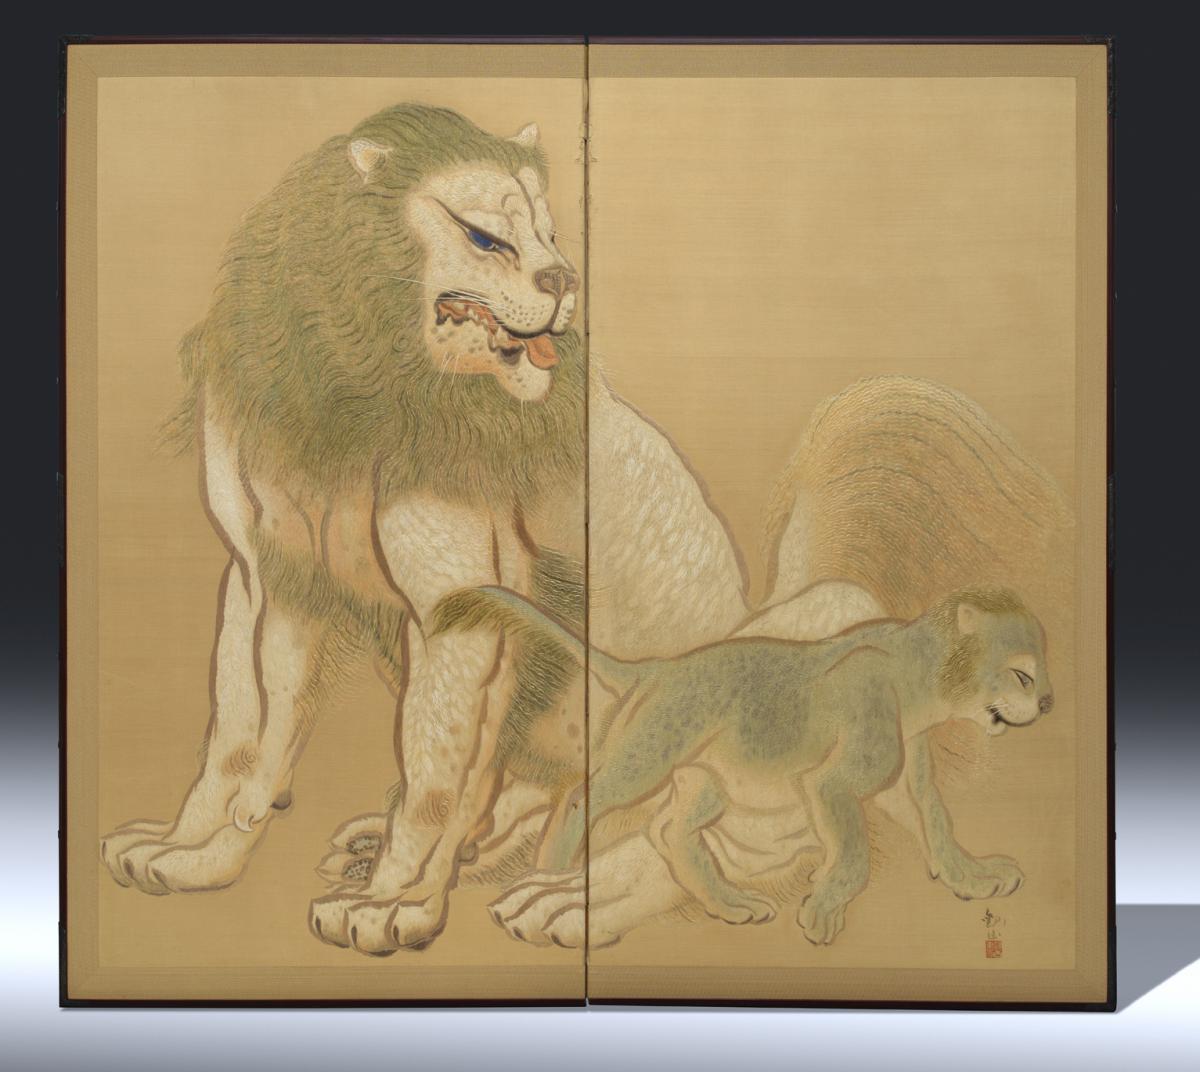 Pair of embroidered screens with lions